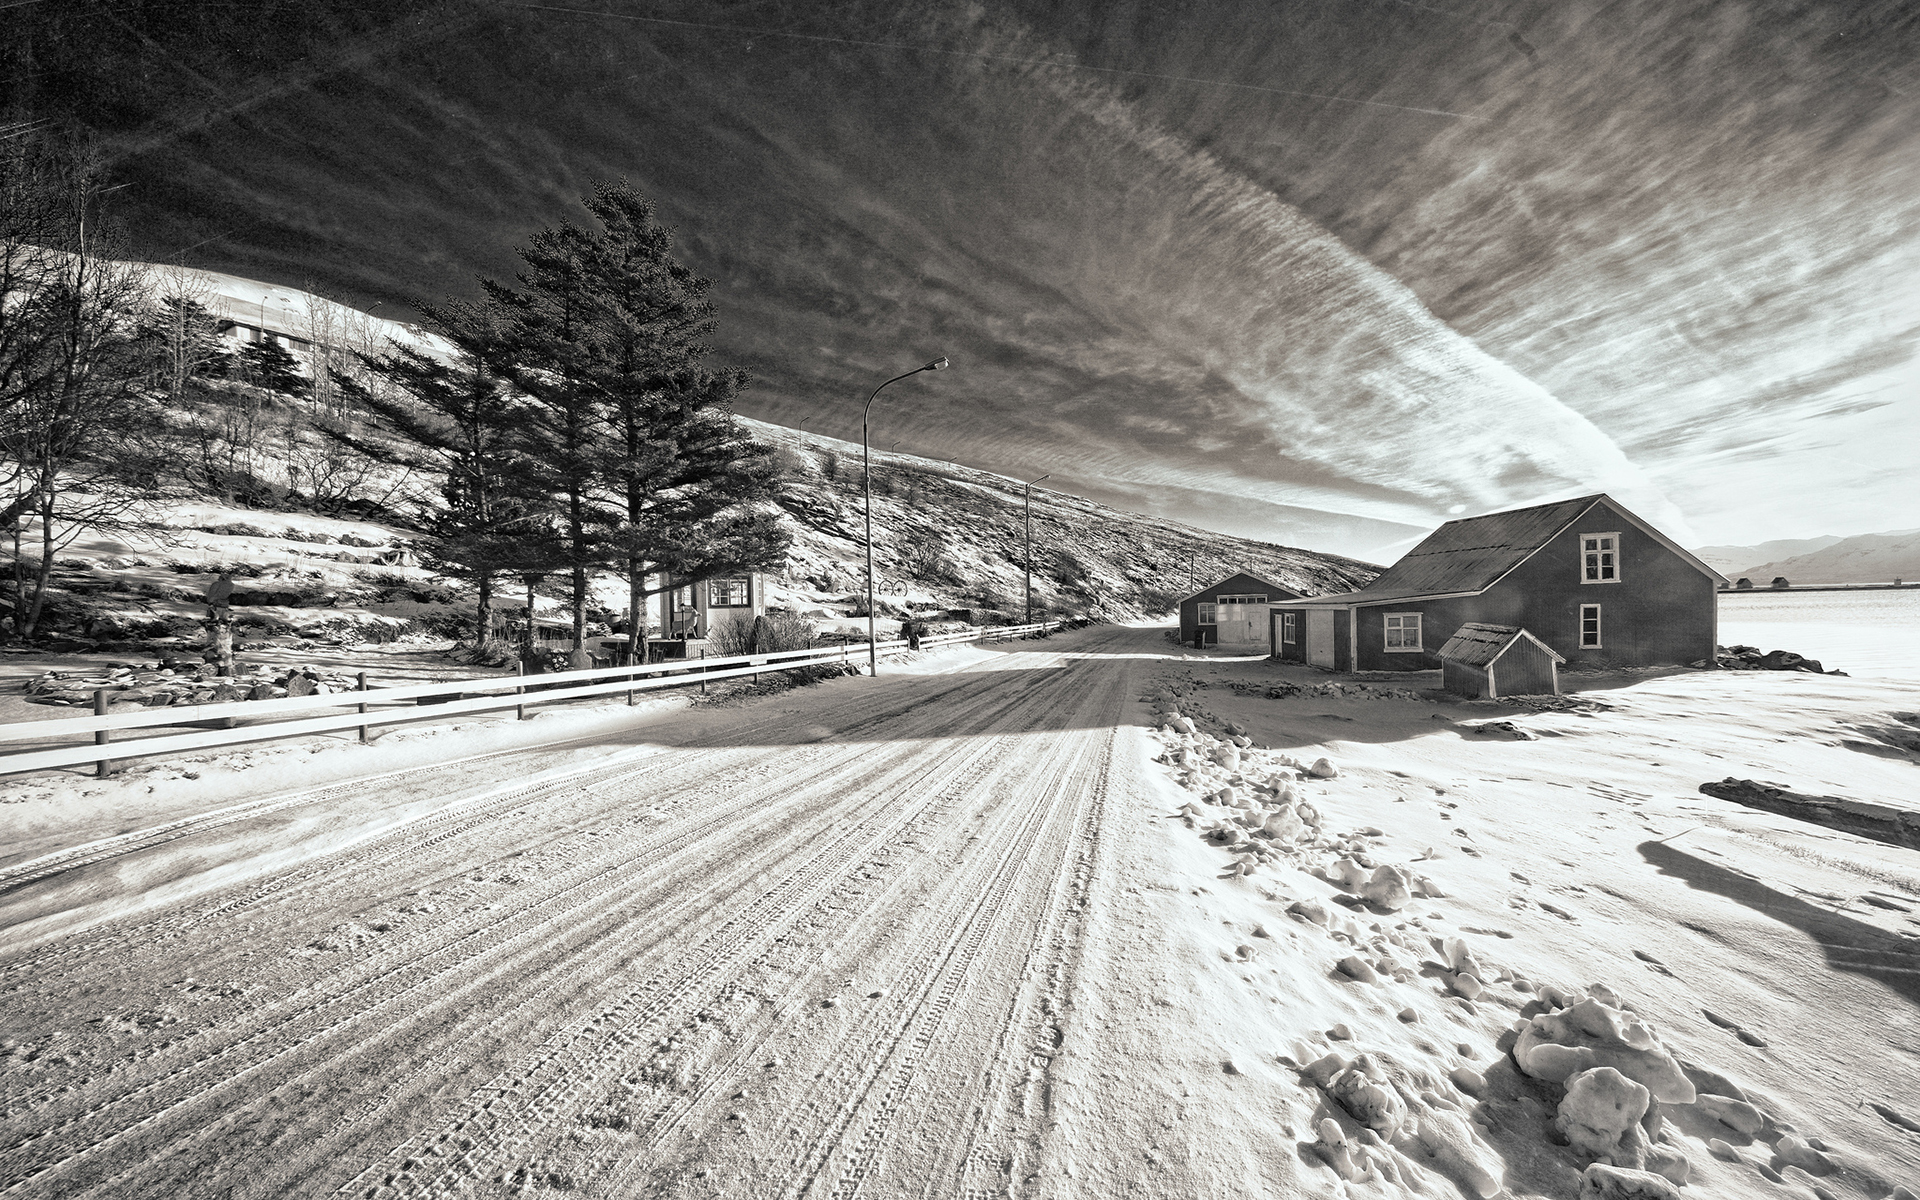 snow, Winter, Road, House, Bw, Trees, Black, White, Roads, Architecture, Houses, Sky, Clouds Wallpaper